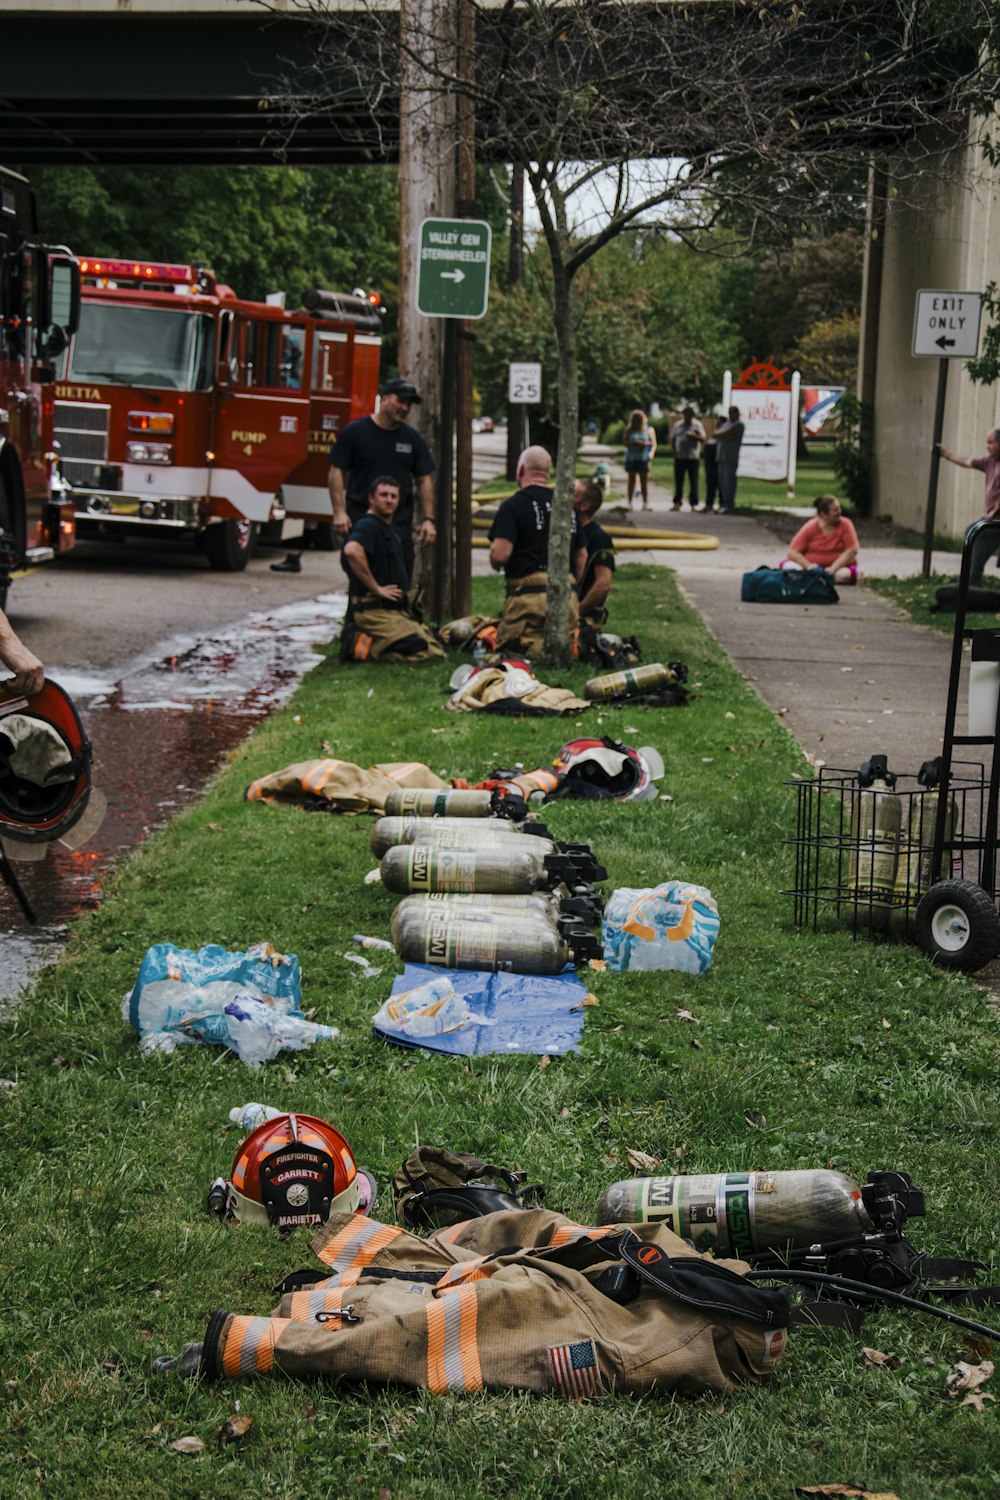 a group of fire fighters laying on the grass